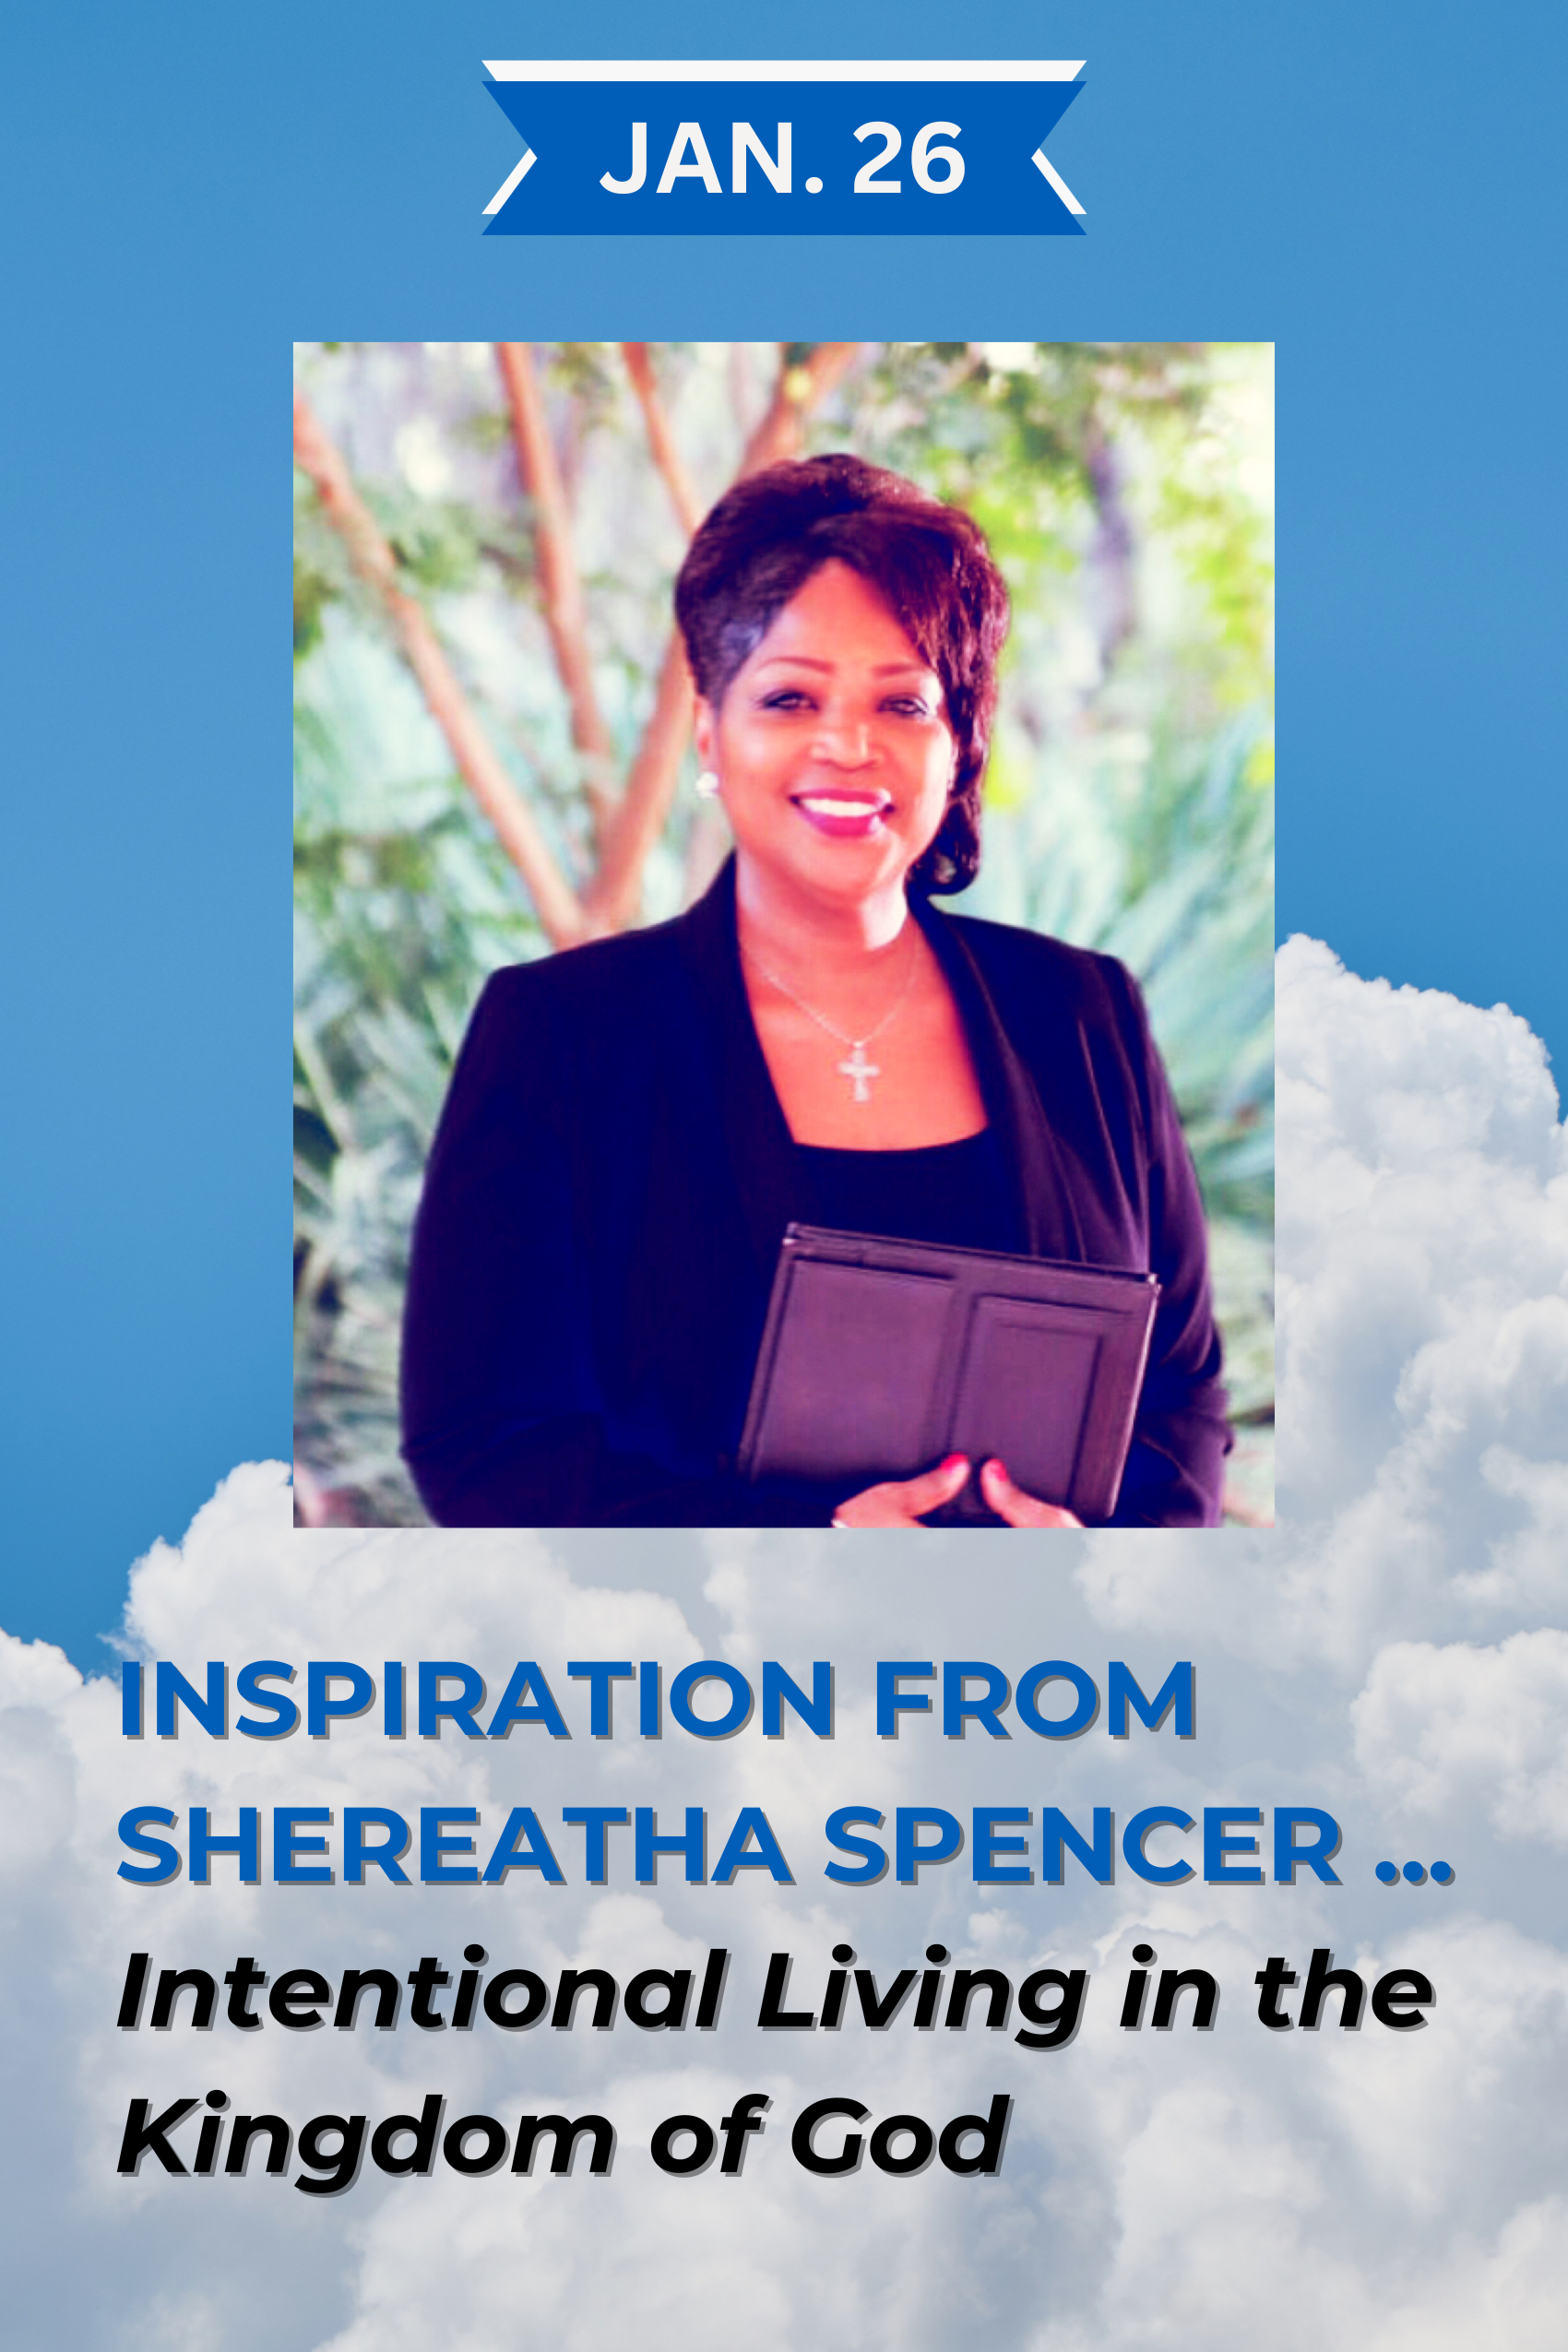 Jan. 26 Fellowship: Get Clarity, Purpose in the New Year with Shereatha Spencer